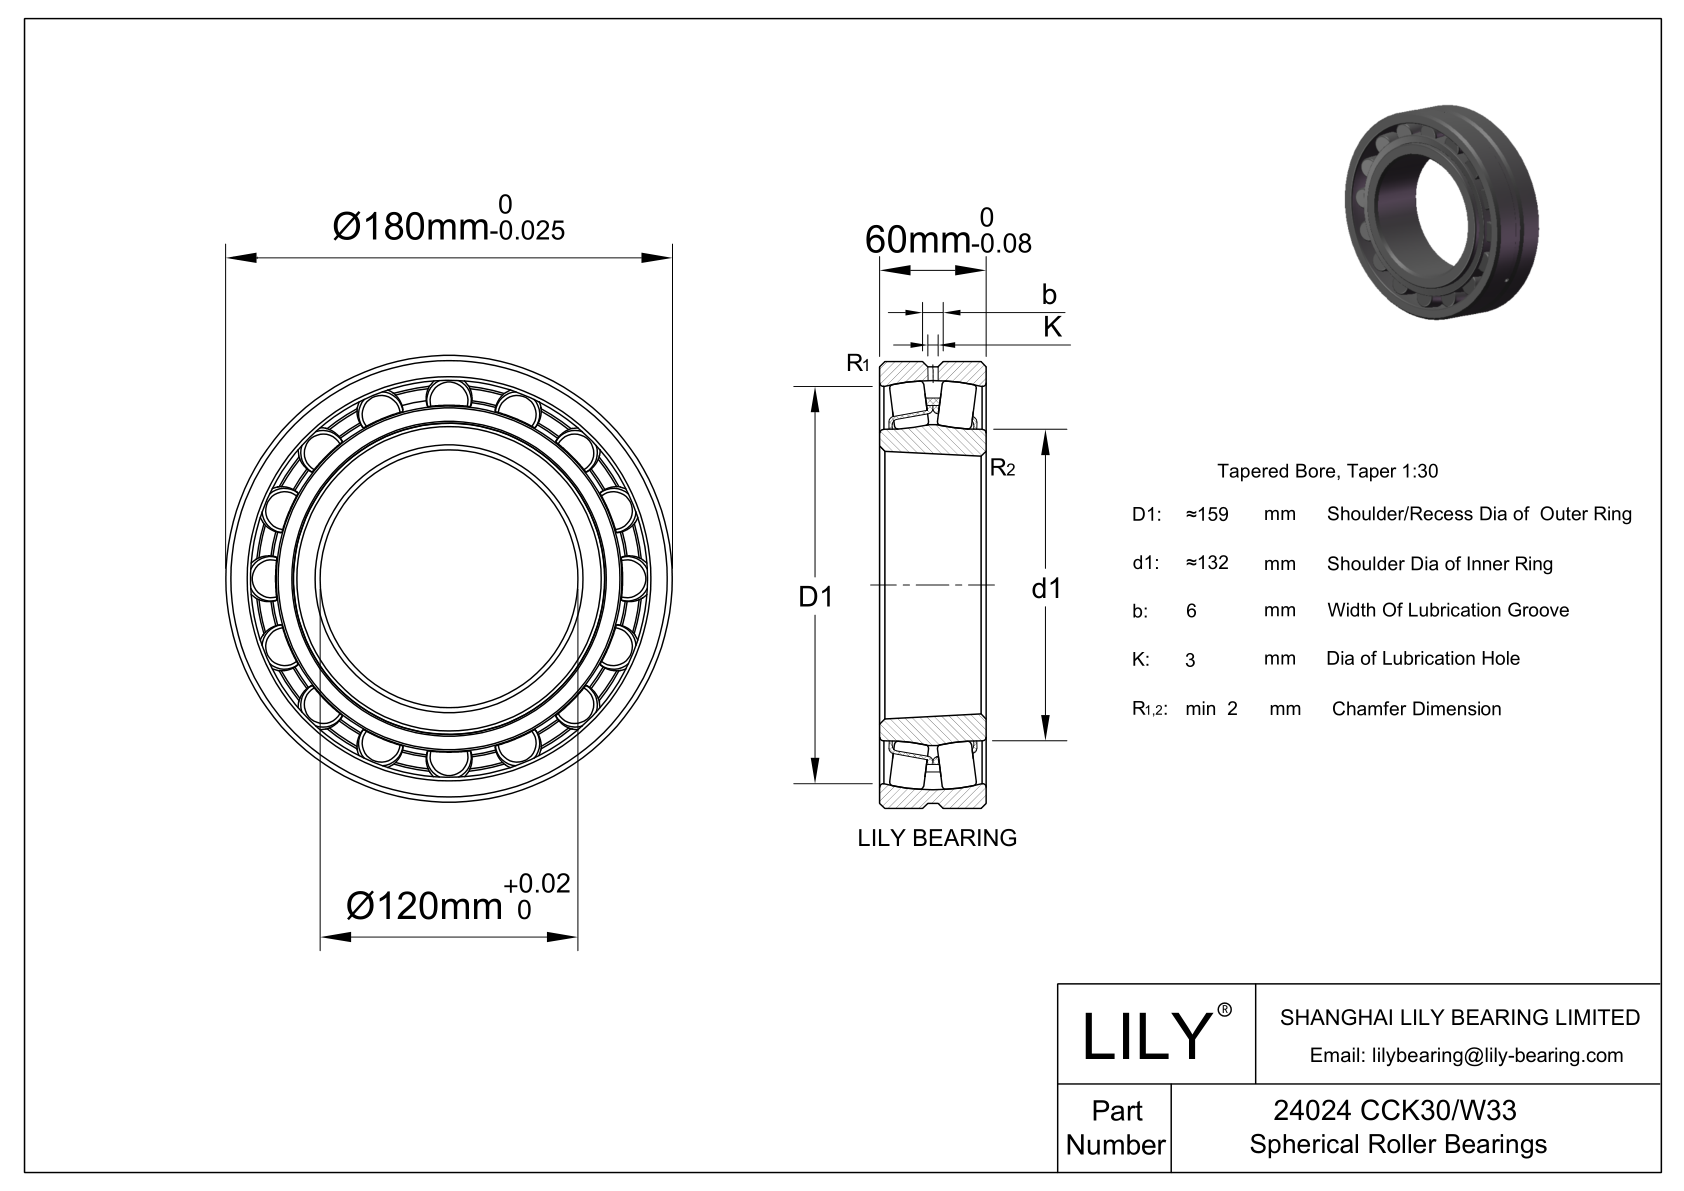 24024 CCK30/W33 Double Row Spherical Roller Bearing cad drawing